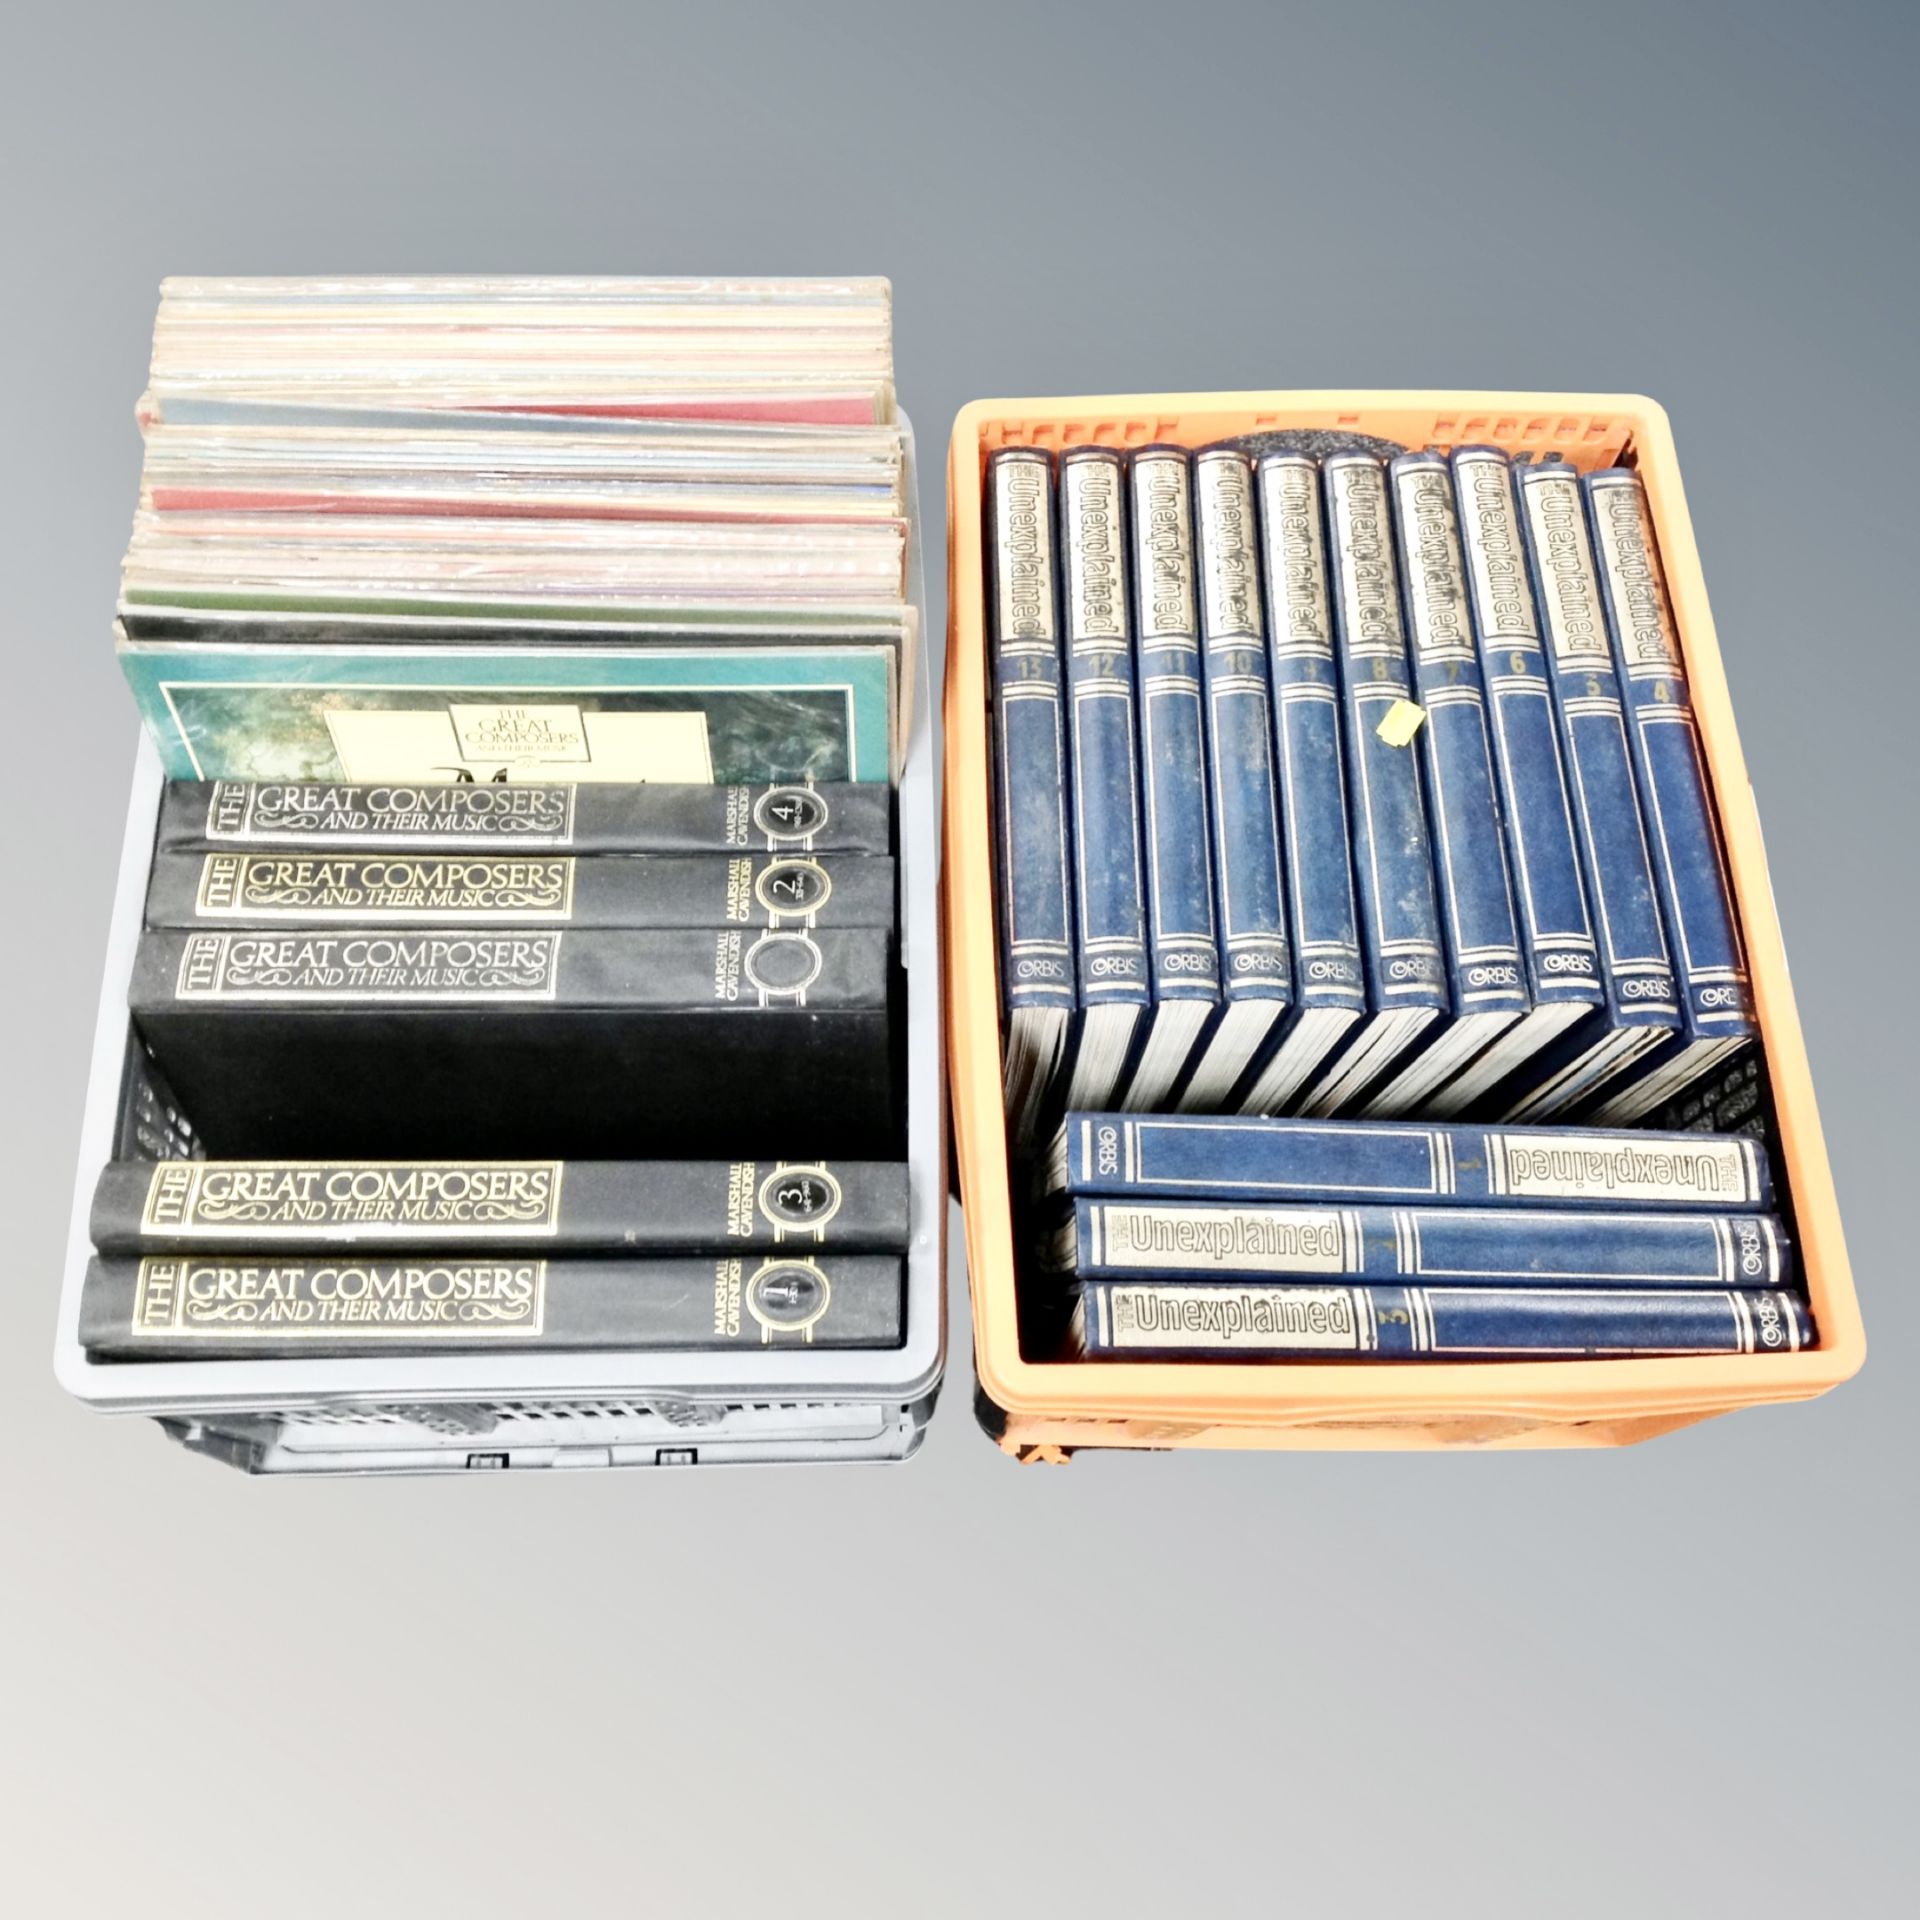 A crate of The Great Composers and their music - books and LPs by Marshall Cavendish,